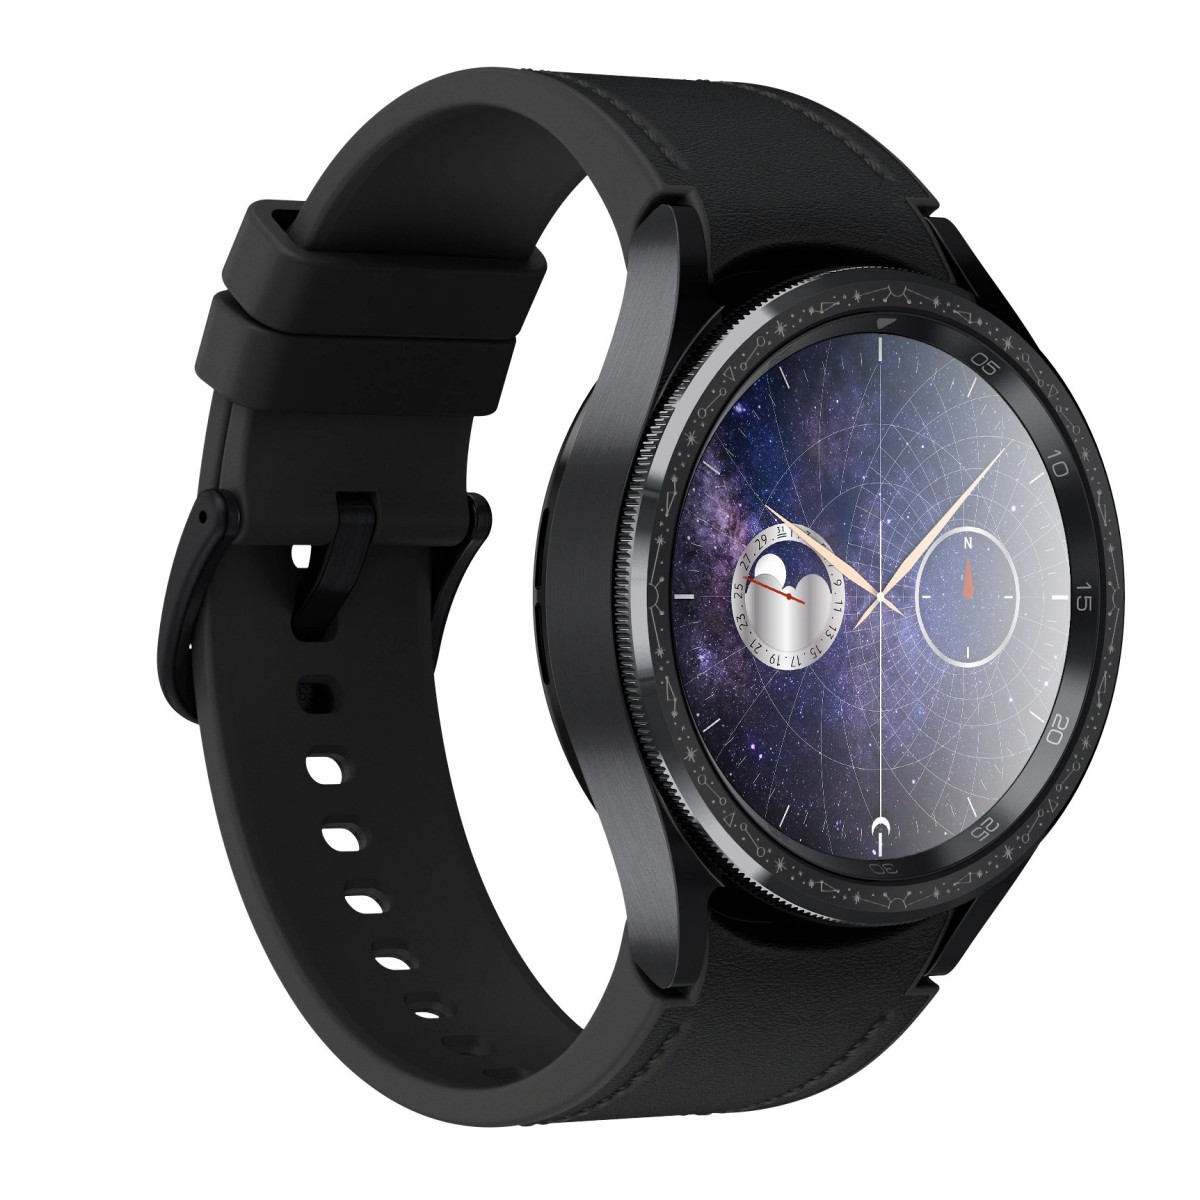 Samsung Galaxy Watch6 Classic Astro Edition arrives with an astrolabe  inspired bezel -  news